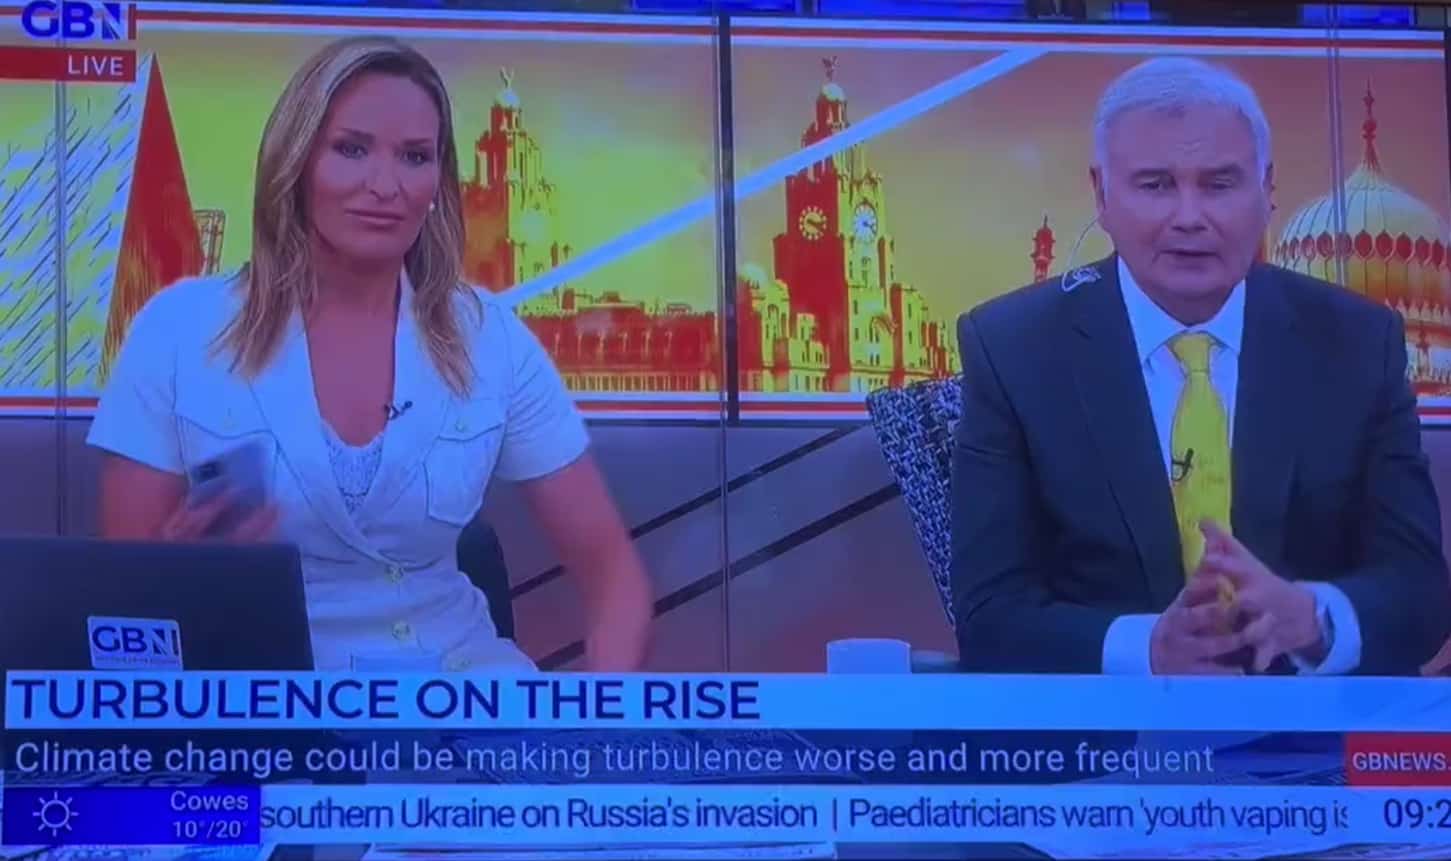 Eamonn Holmes and Isabel Webster caught in foul-mouthed conversation in on-air blunder